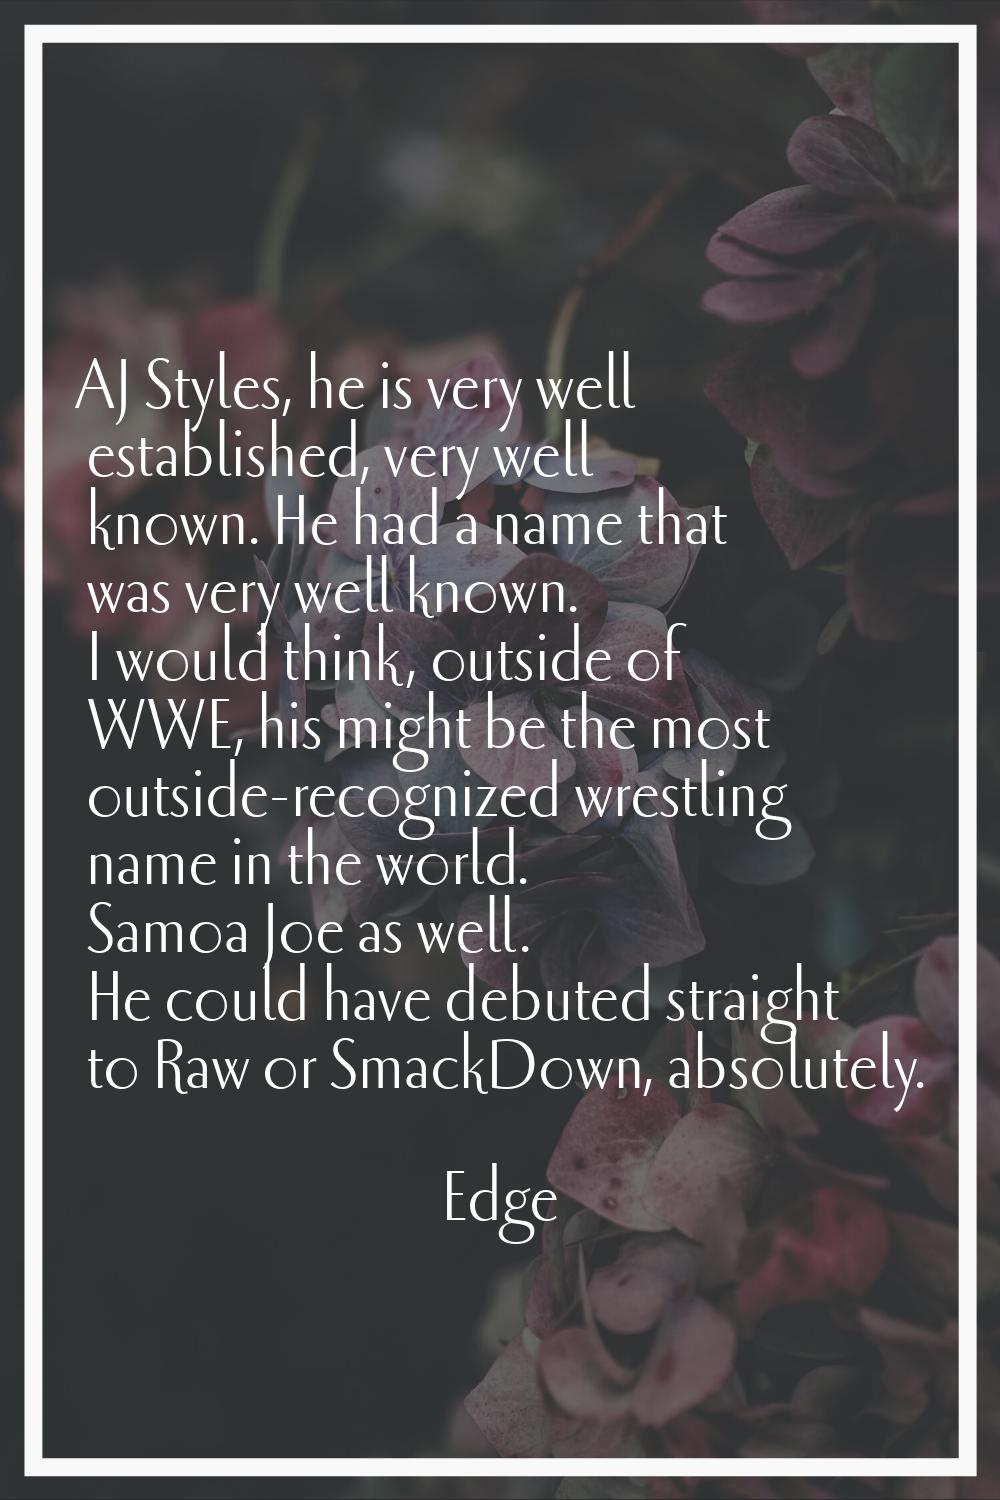 AJ Styles, he is very well established, very well known. He had a name that was very well known. I 